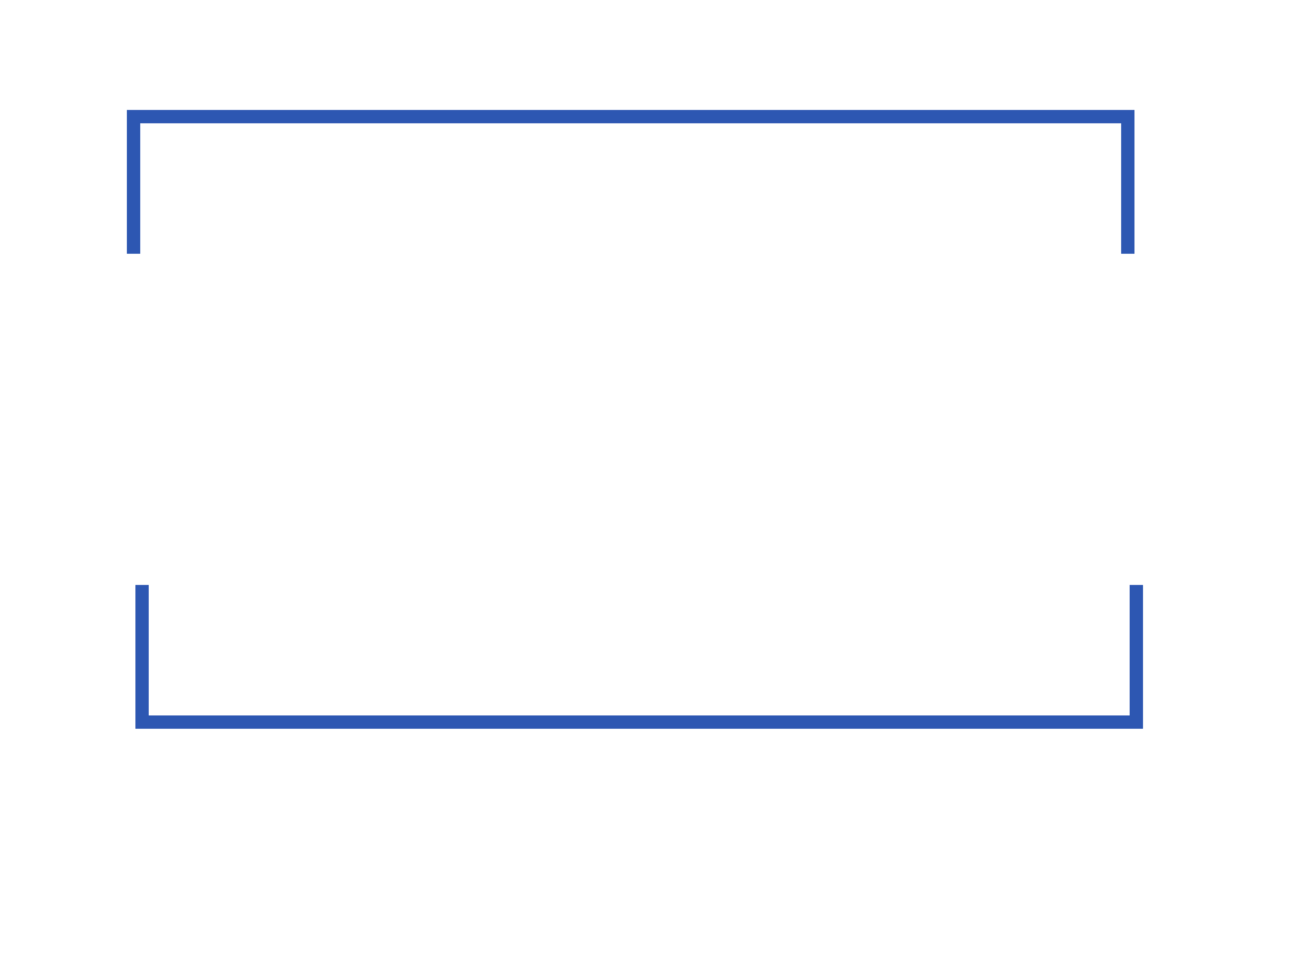 Design with Confidence